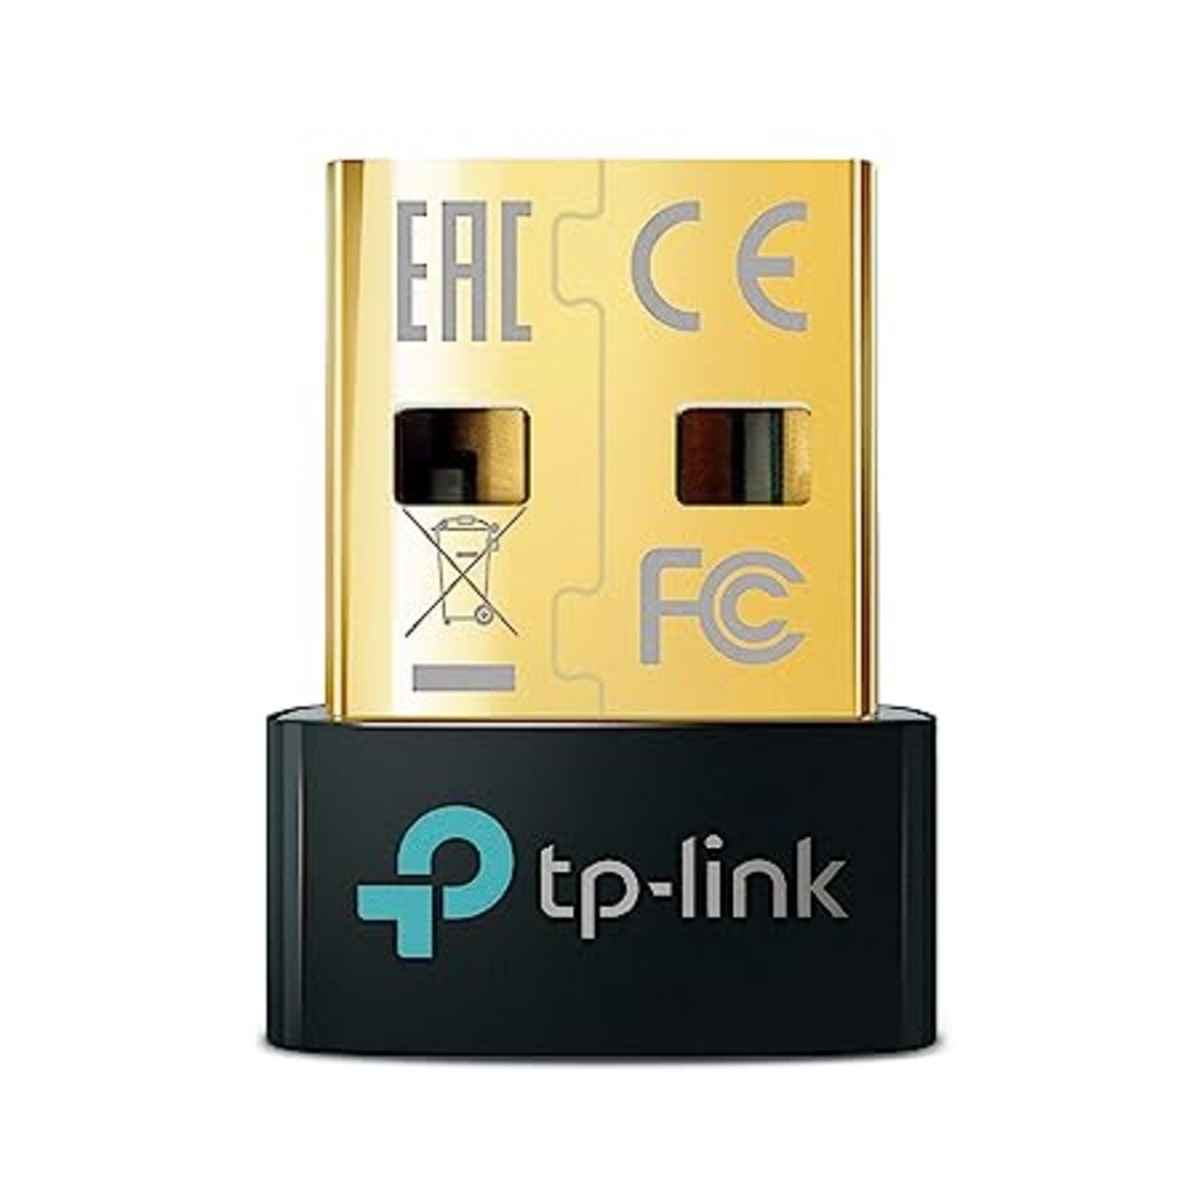 TP-Link USB Bluetooth Adapter for PC 5.0 Bluetooth Dongle Receiver (UB500)